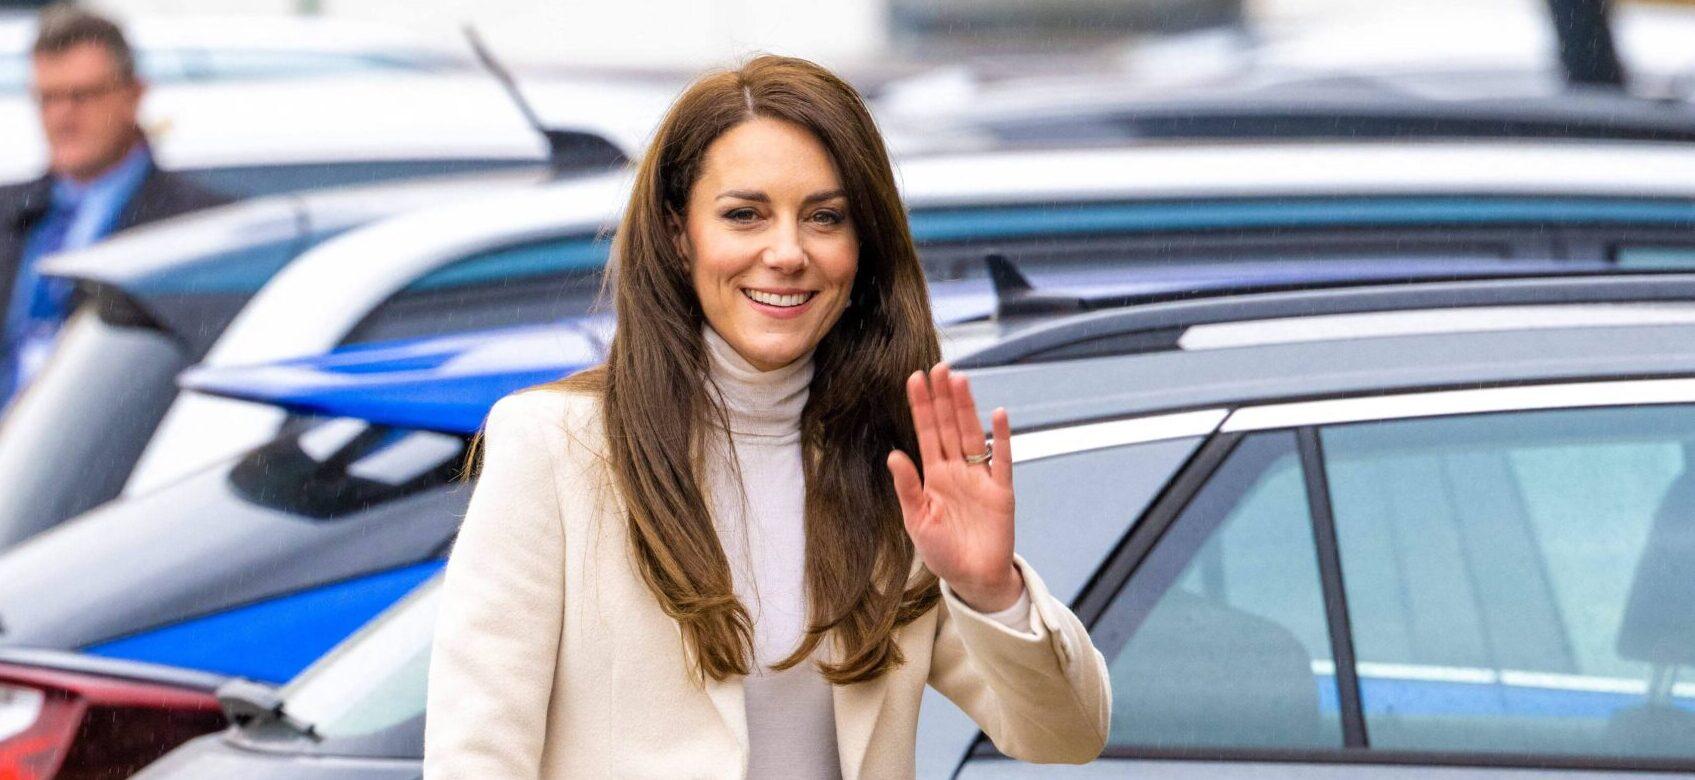 Palace Puts Up Job Listing For Communications Assistant Amid Kate Middleton PR Disaster